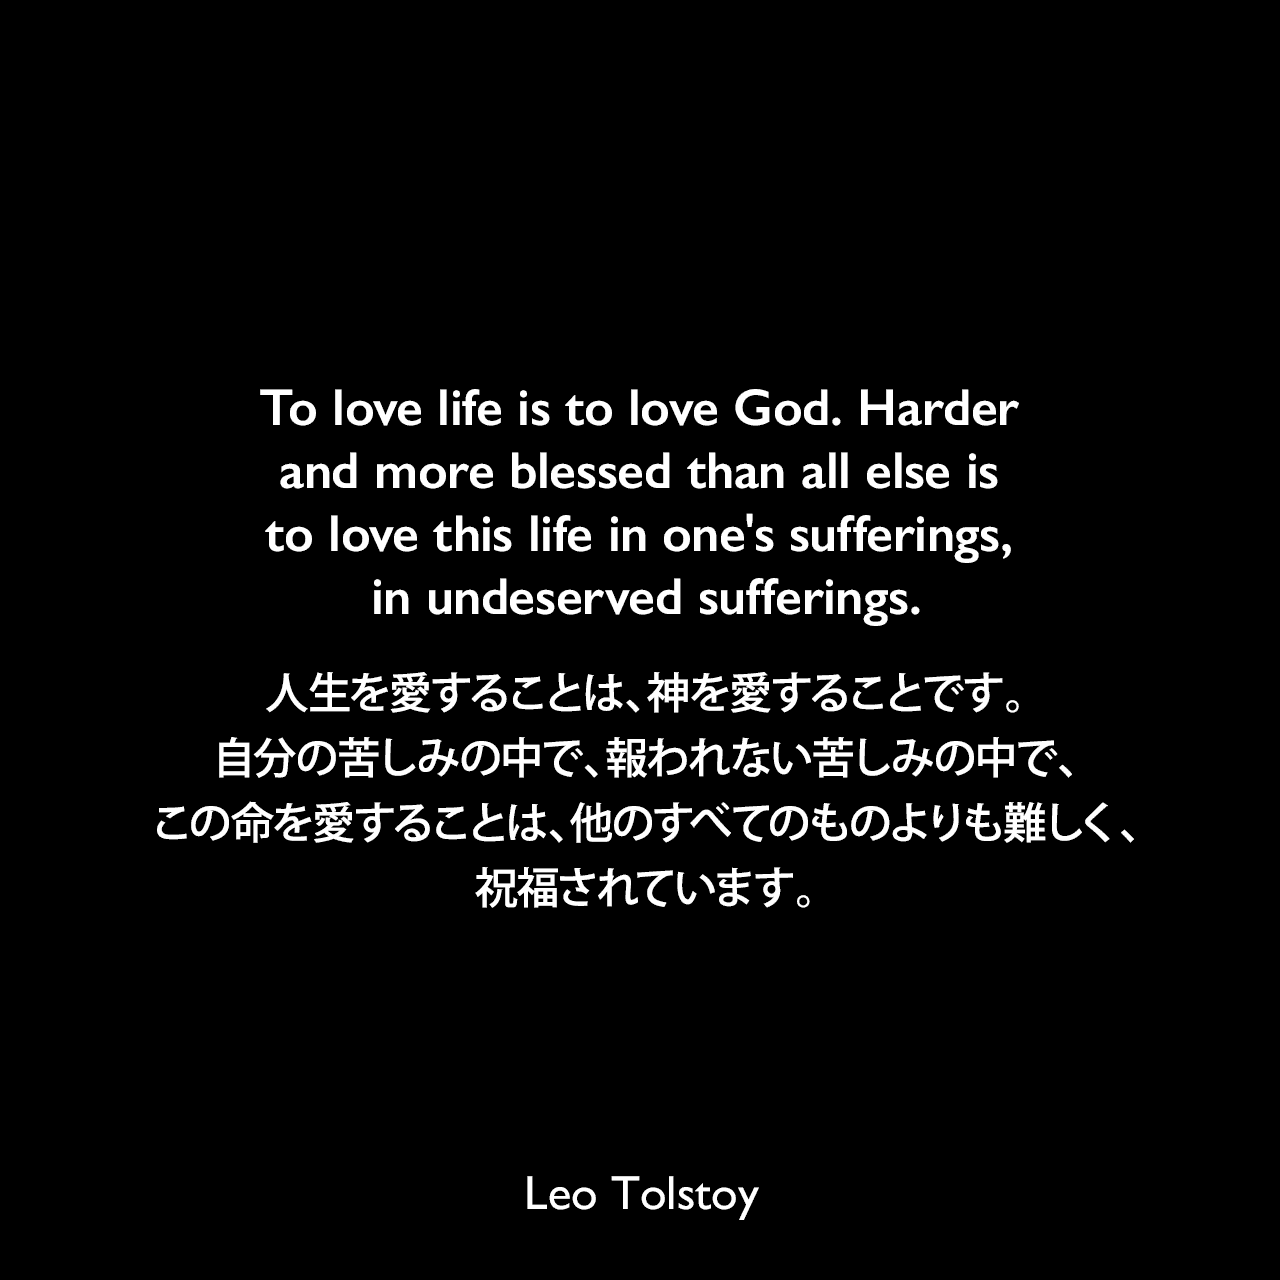 To love life is to love God. Harder and more blessed than all else is to love this life in one's sufferings, in undeserved sufferings.人生を愛することは、神を愛することです。自分の苦しみの中で、報われない苦しみの中で、この命を愛することは、他のすべてのものよりも難しく、祝福されています。- トルストイによる小説「戦争と平和」よりLeo Tolstoy